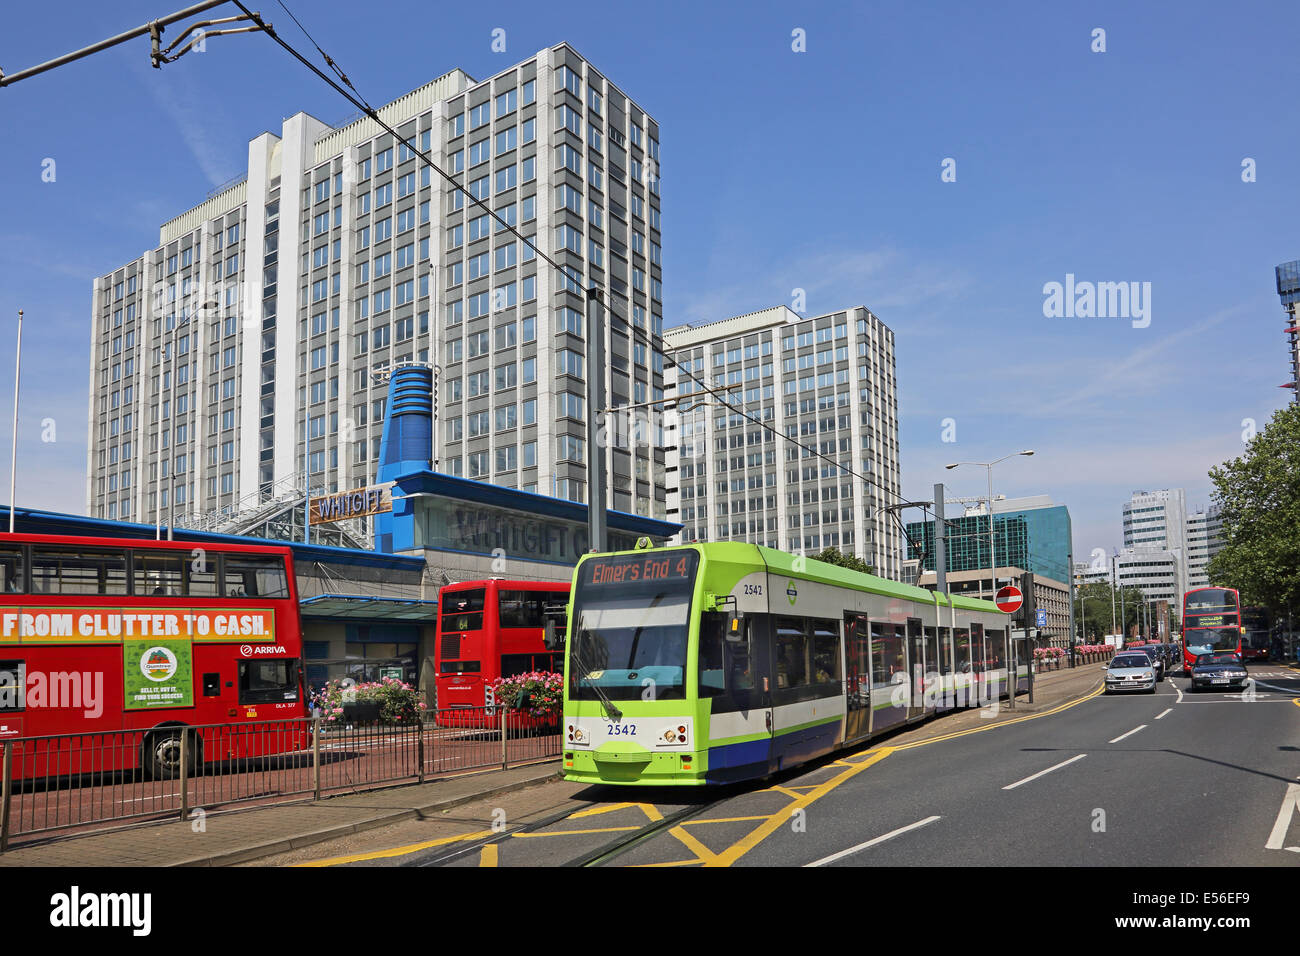 A Tram on the Croydon Tramlink system travels on Wellesley Road in Croydon town centre Stock Photo